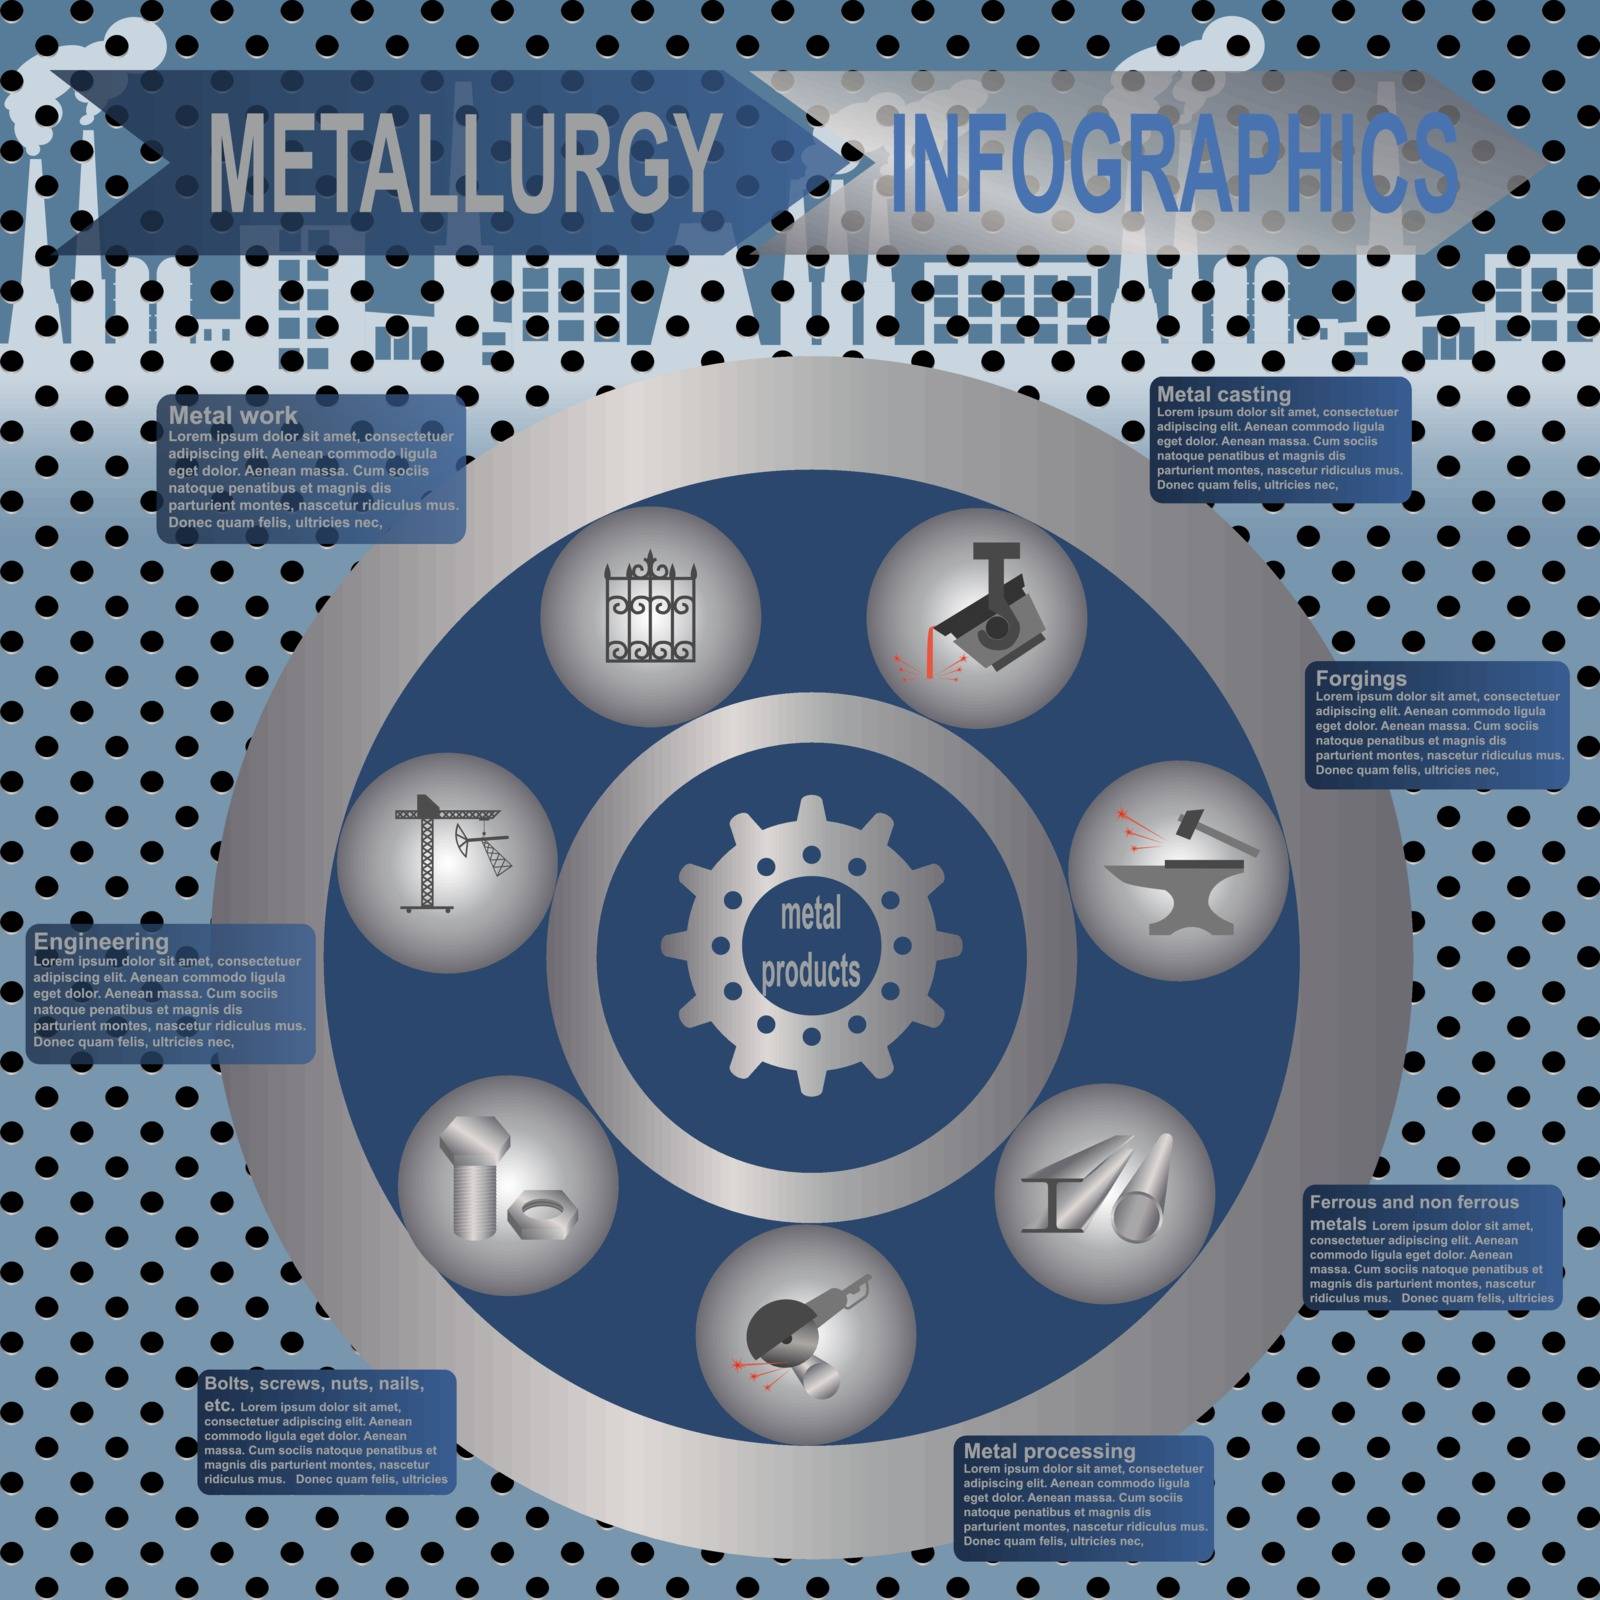 Metallurgical industry info graphics by A7880S